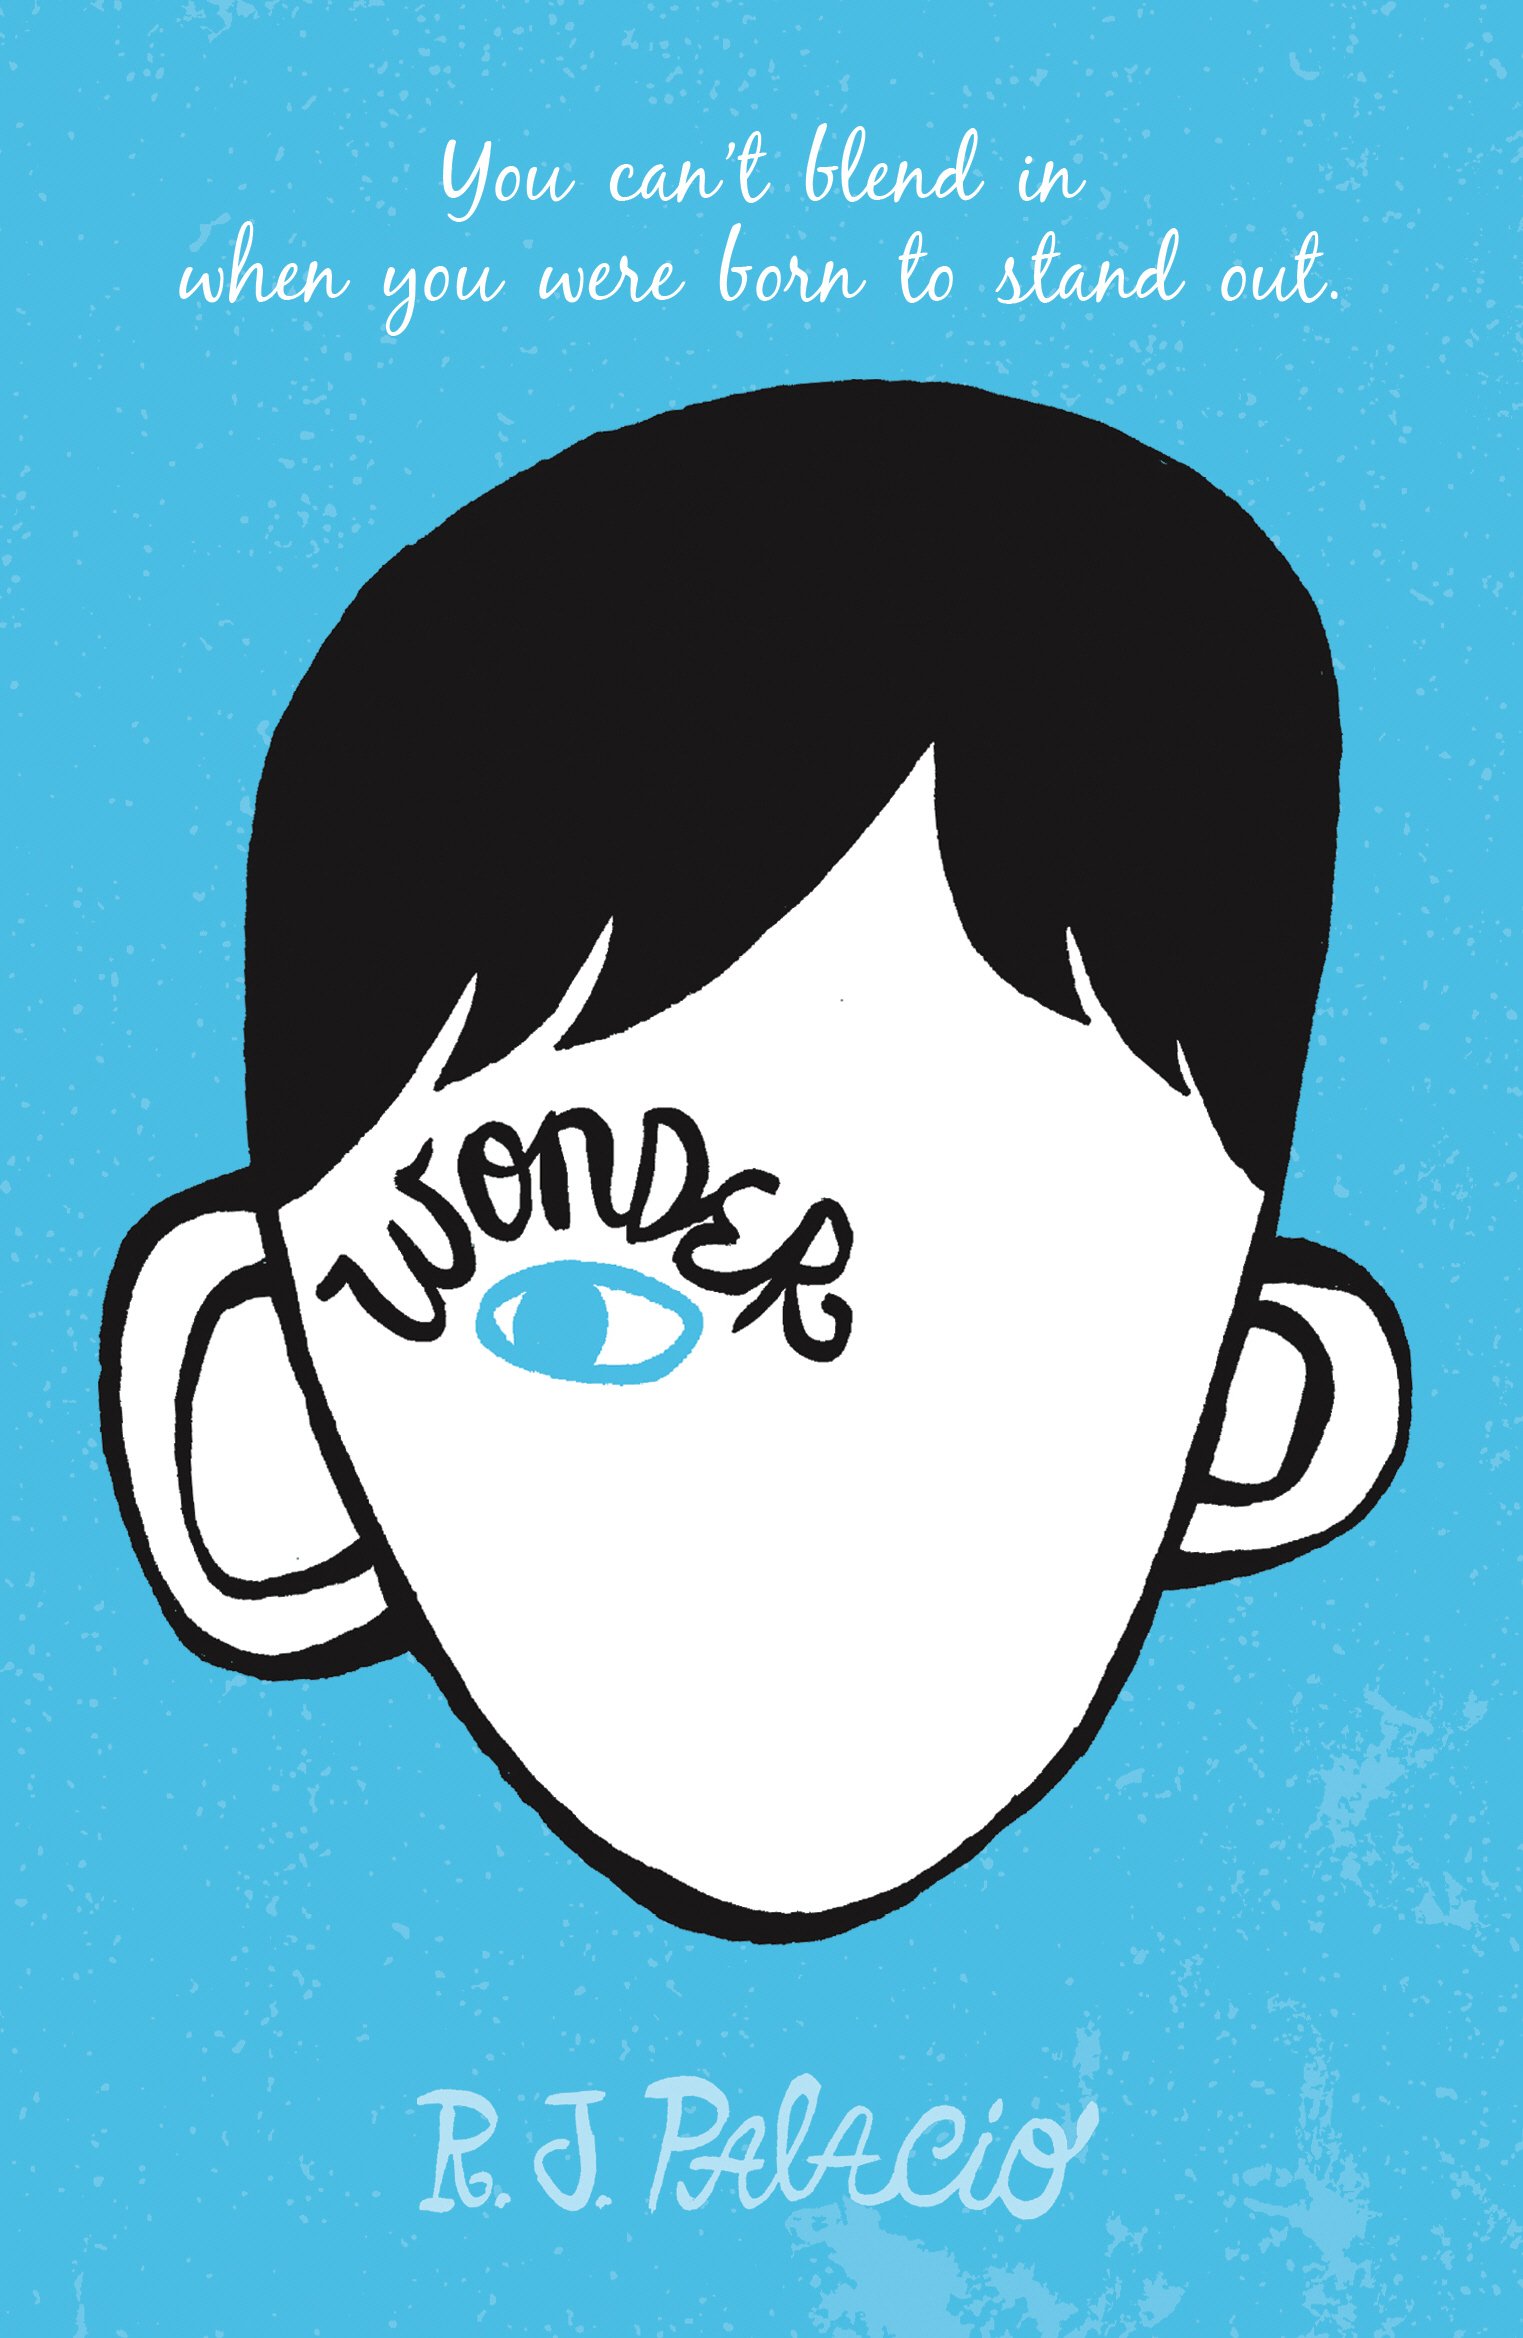 Photo of “Wonder” by RJ Palacio is a Moving Story